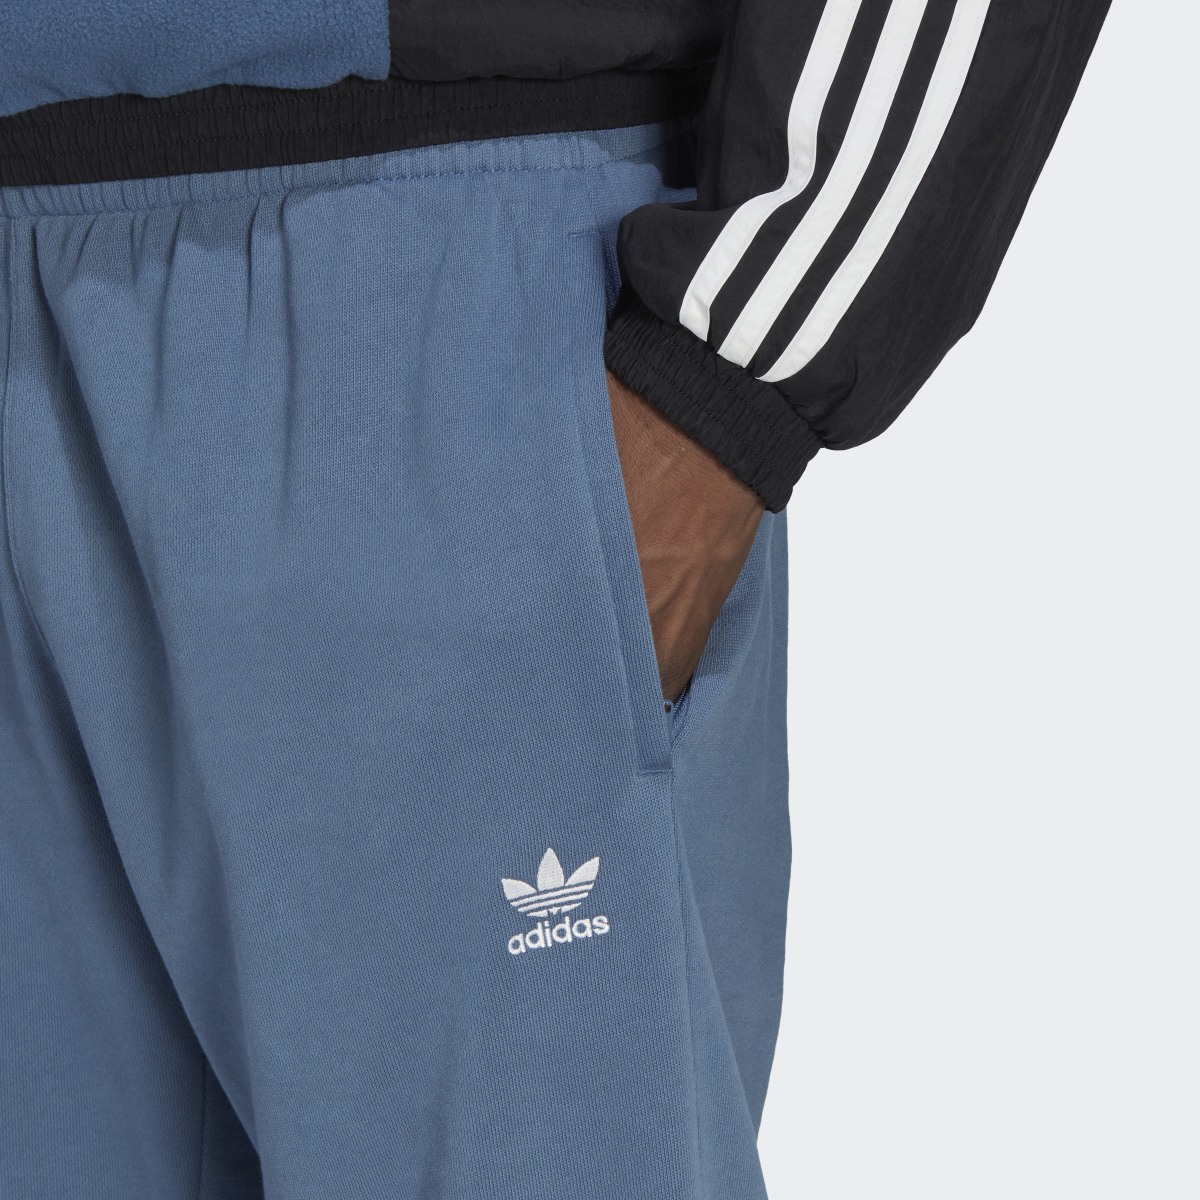 Adidas Rekive Placed Graphic Sweat Pants. 7